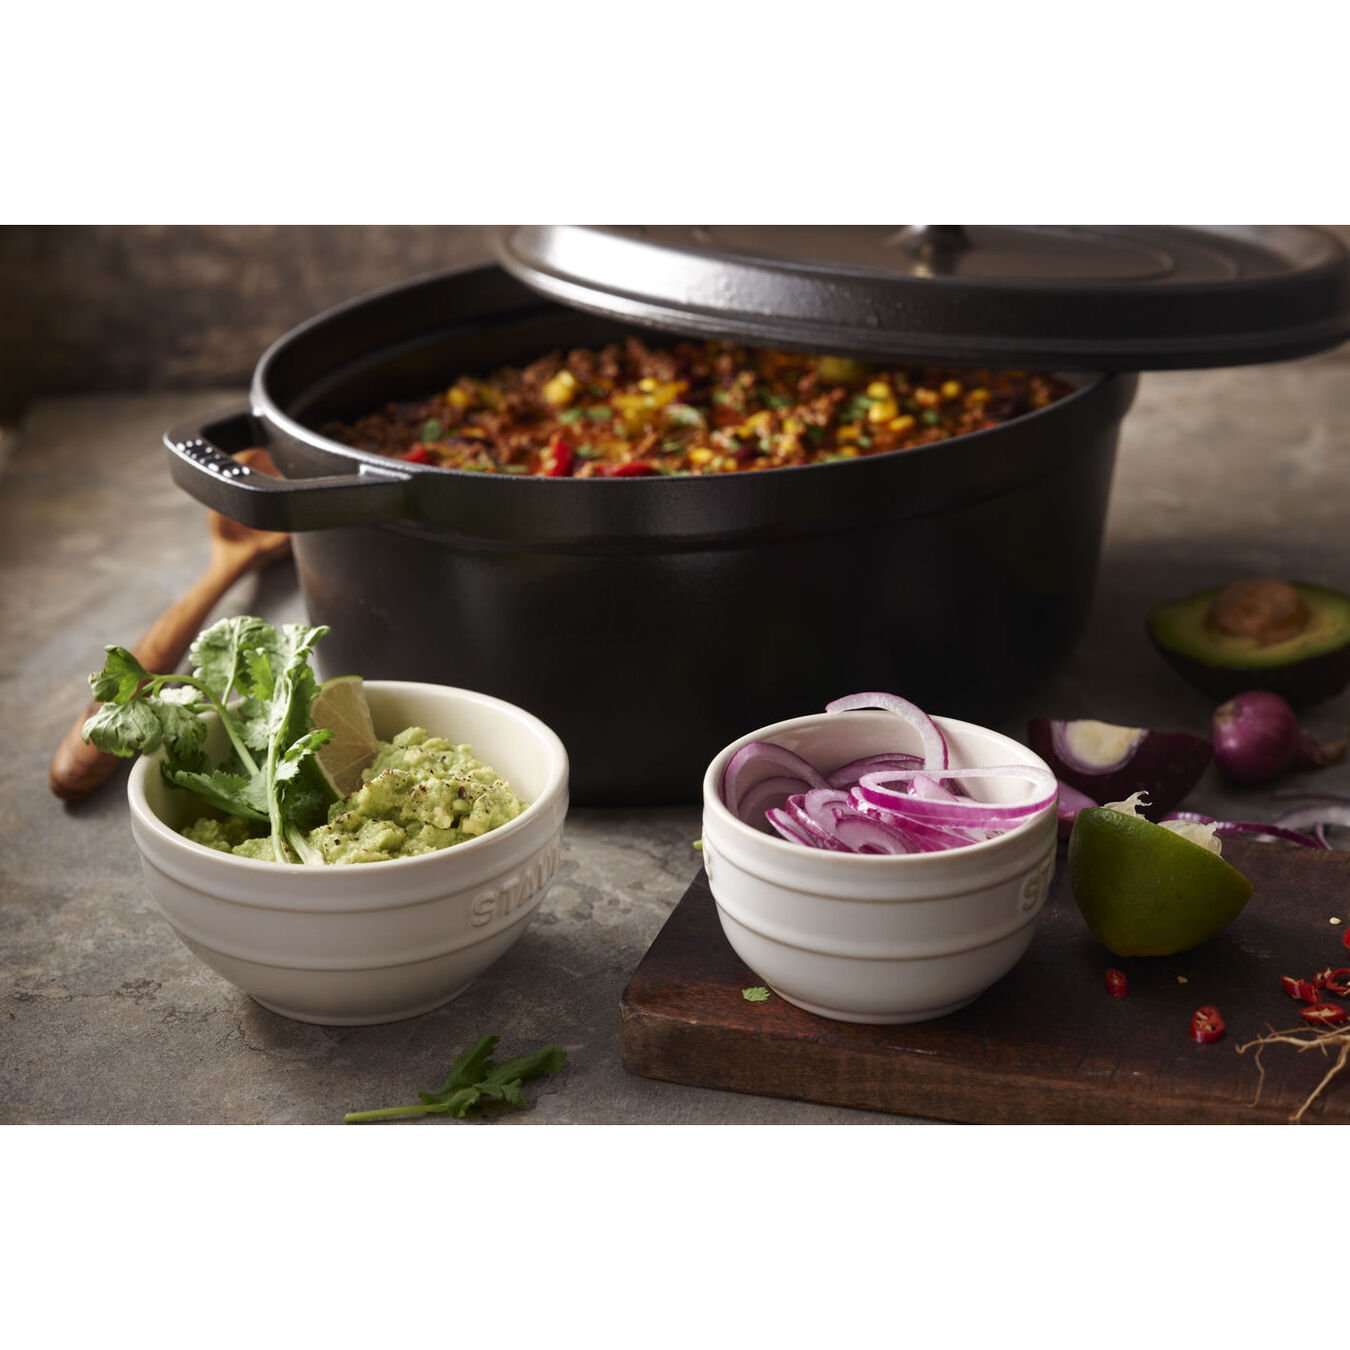 12 l cast iron oval Cocotte, black - Visual Imperfections,,large 5